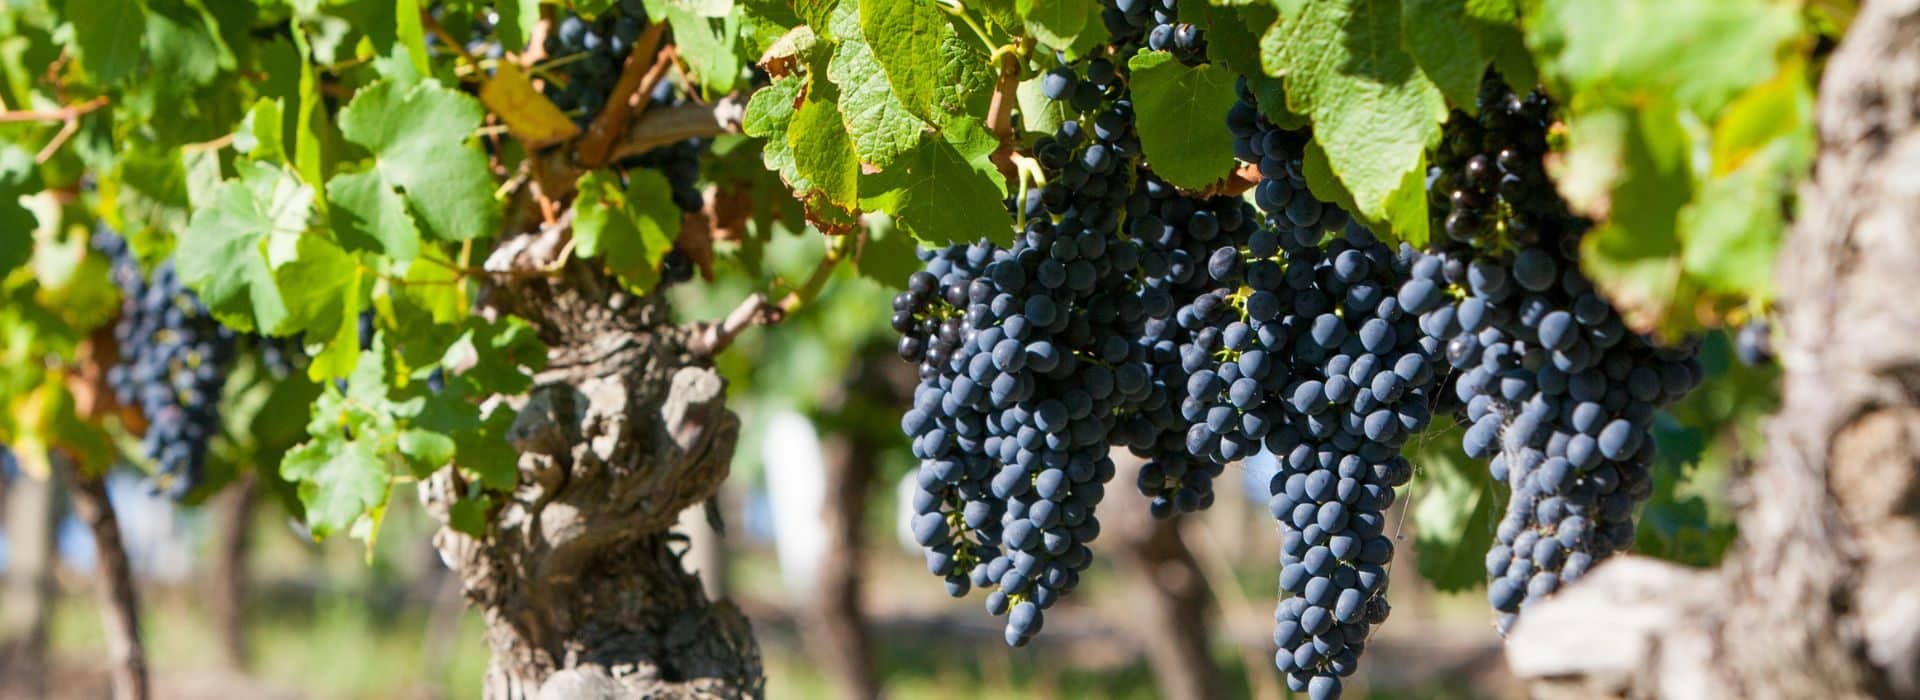 Grapes growing on a grapevine